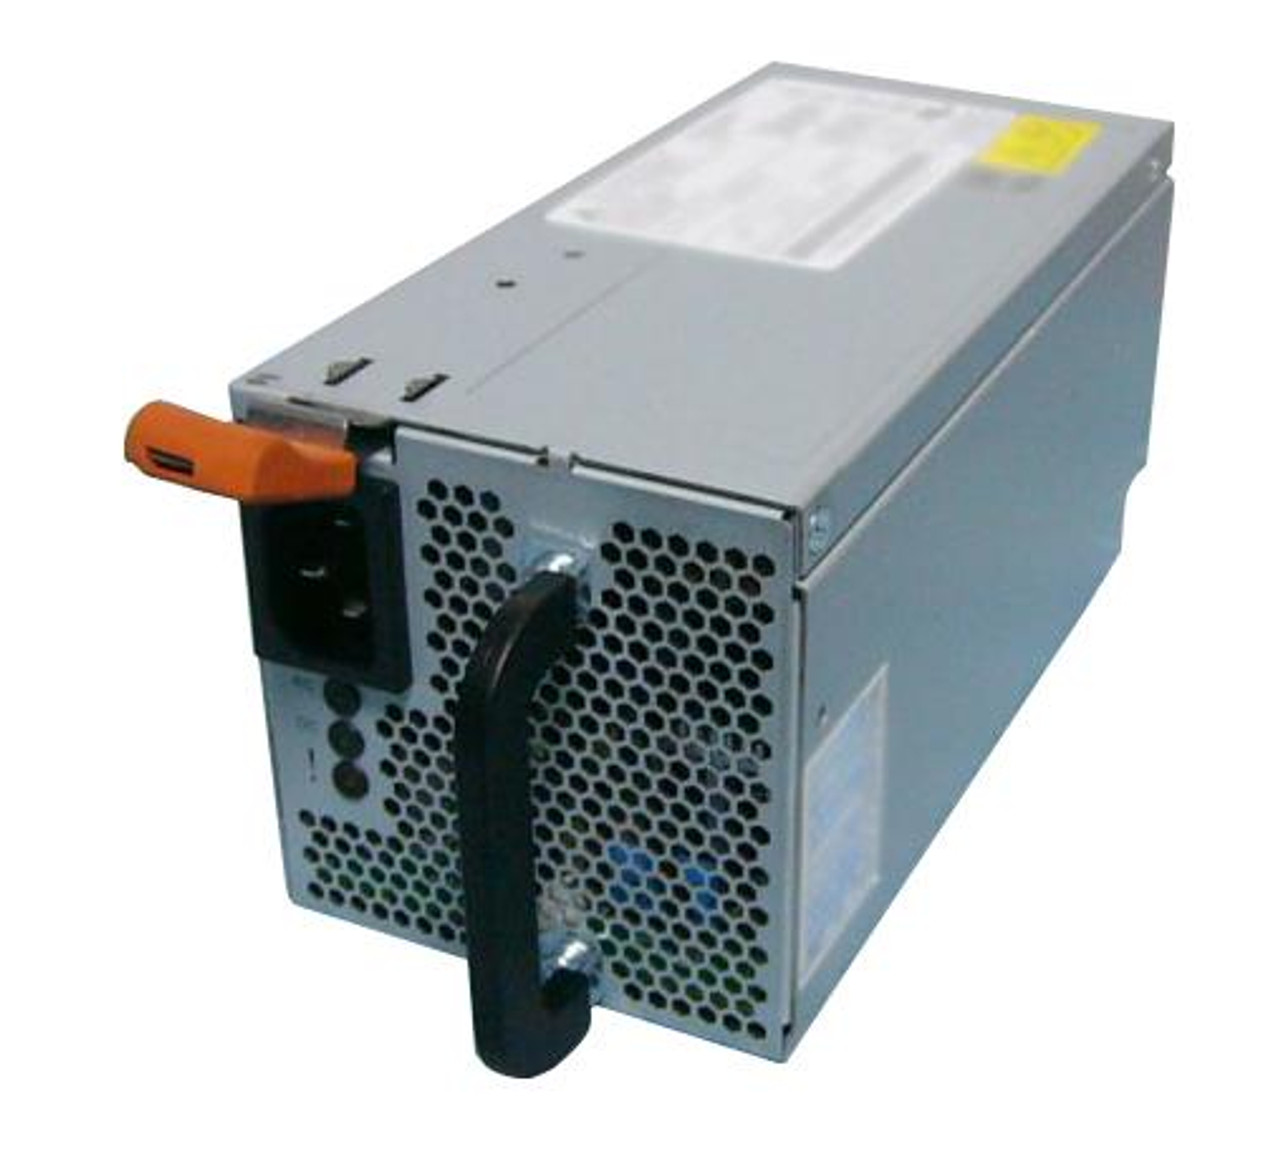 DPS-350AB-16 IBM 350-Watts Hot Swap Power Supply for System x3100 M4